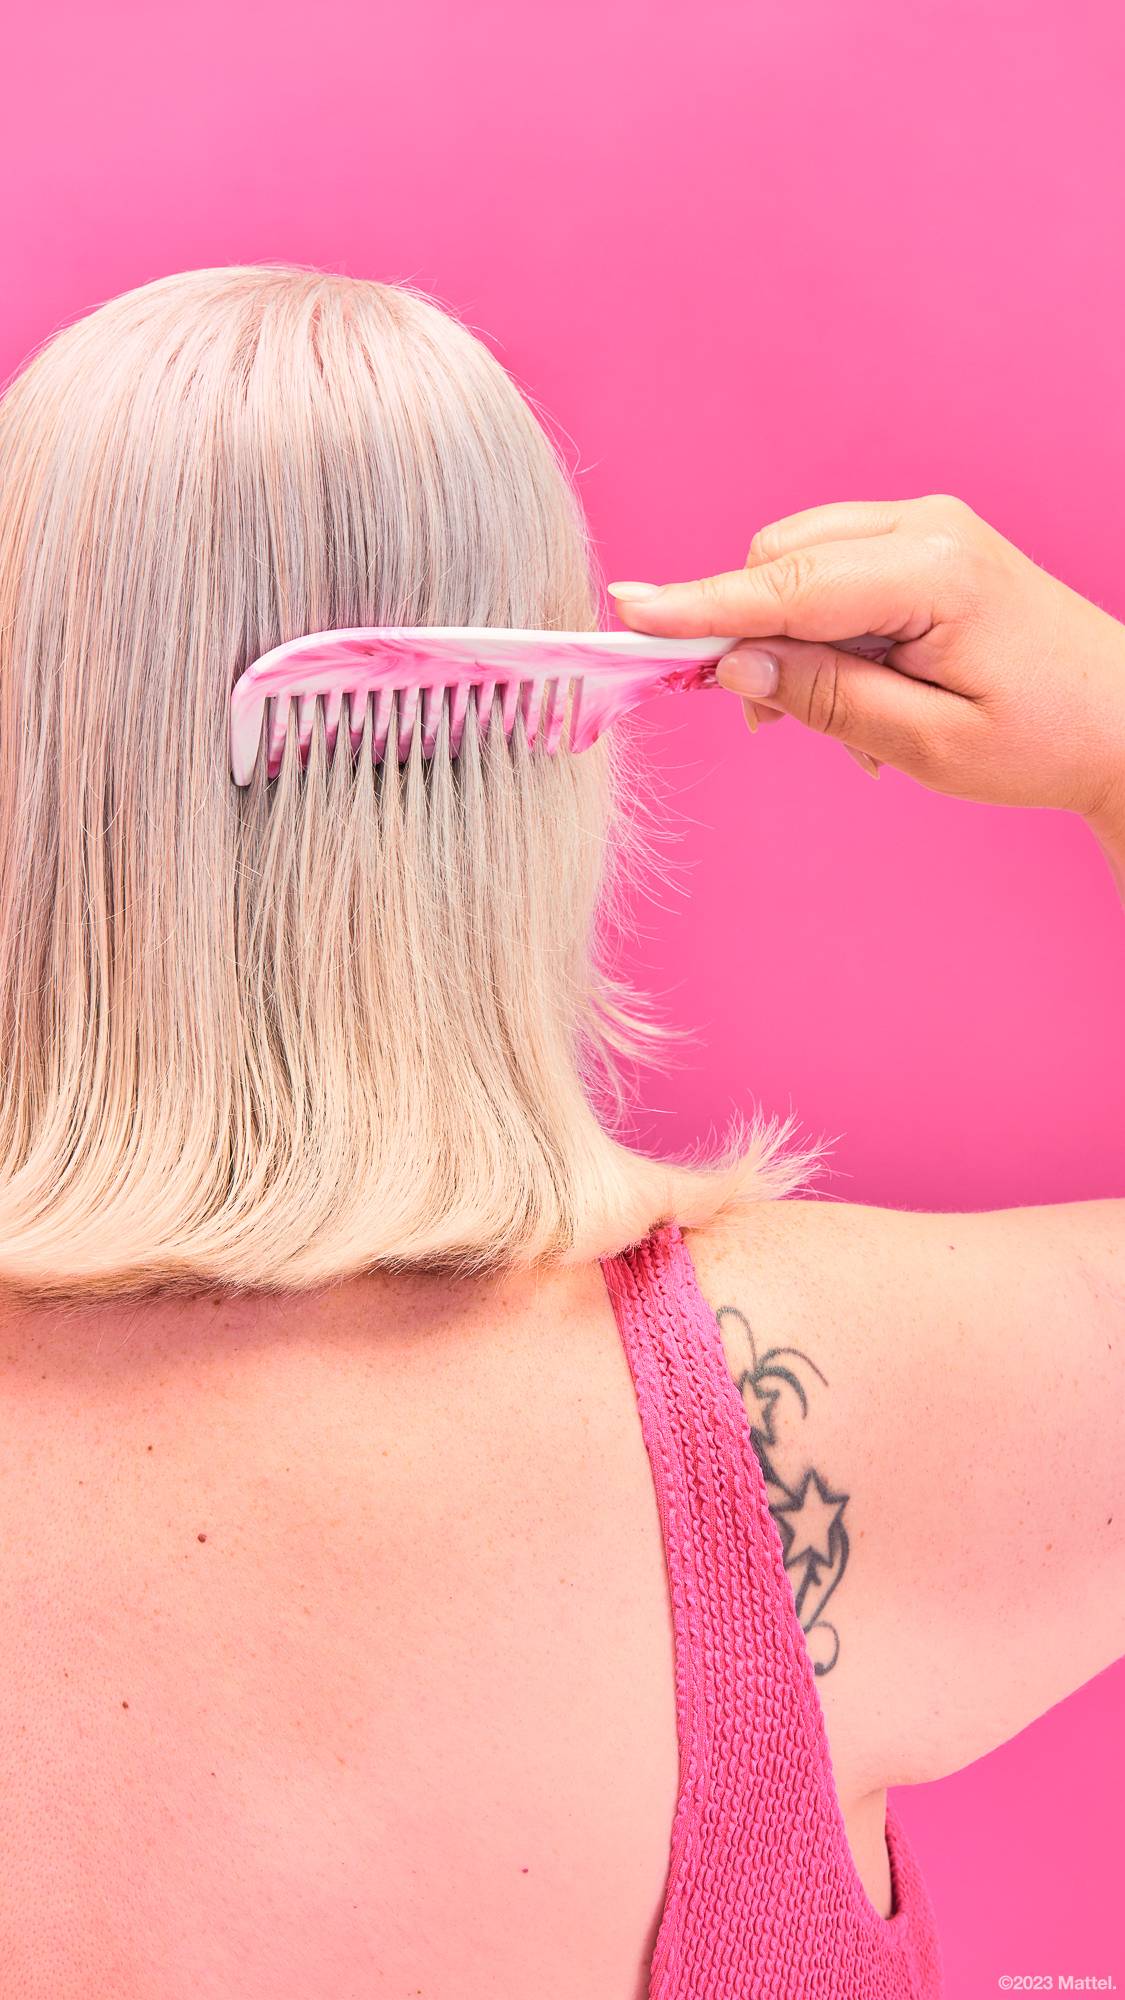 Image shows the back of the model's head being brushed with the Barbie comb in front of a bright pink background.